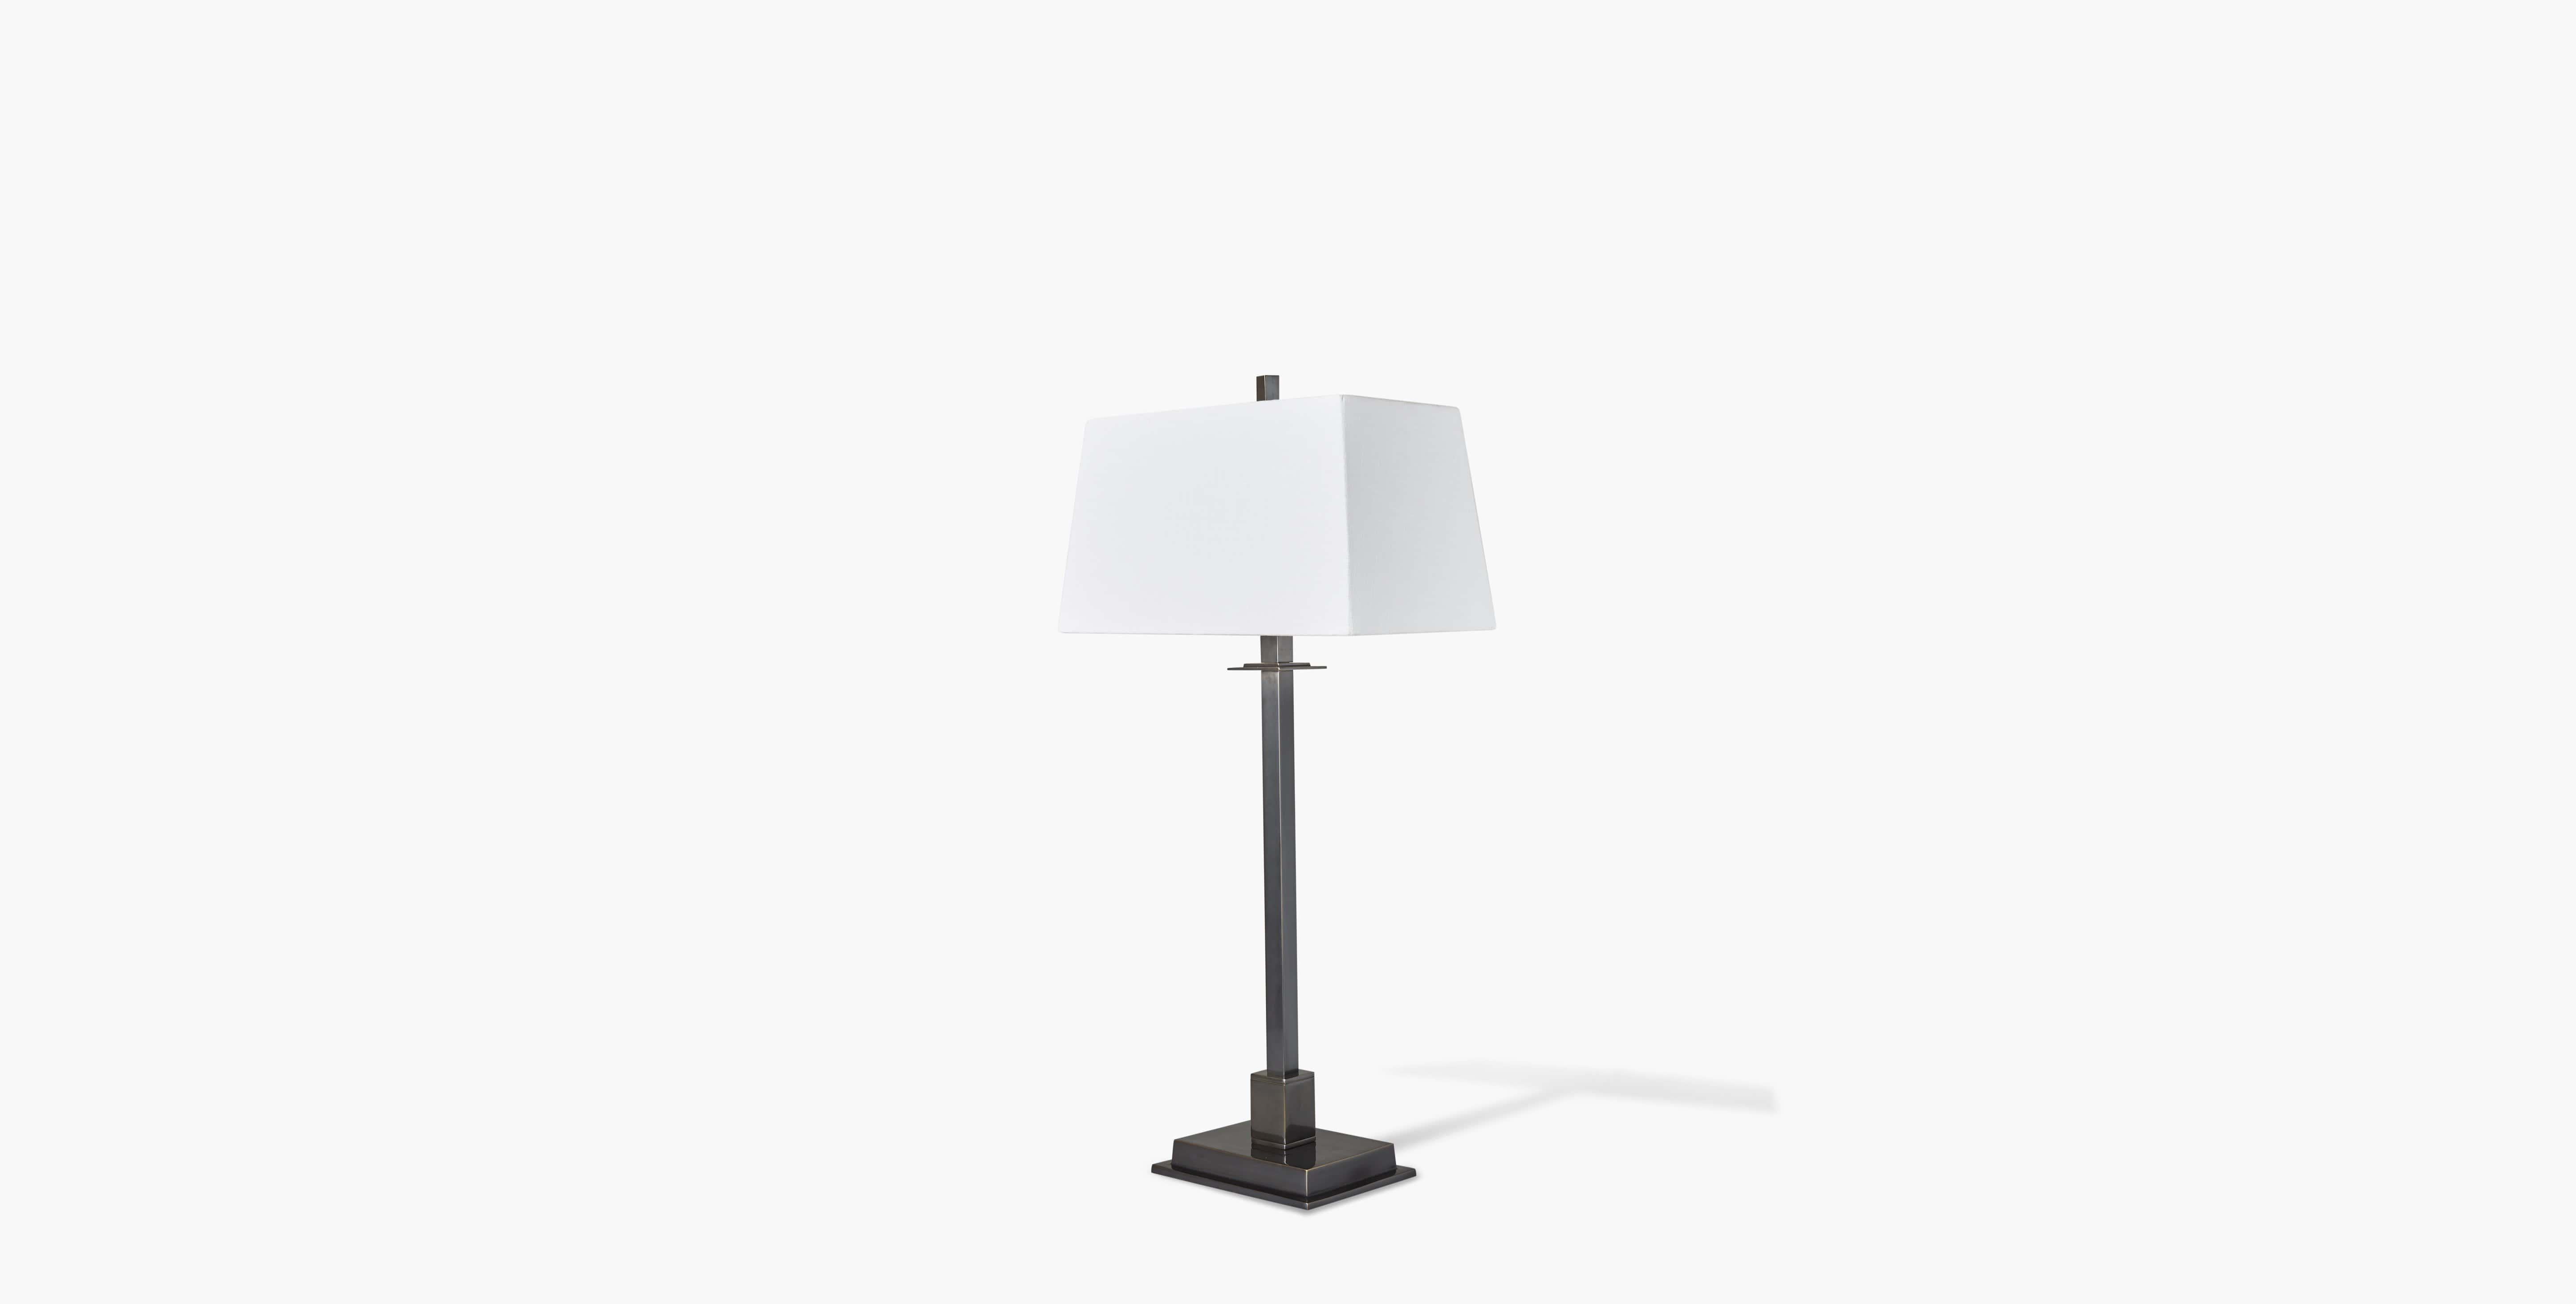 Our Ashton Lamp offers a sleek and modernized version of the classic candlestick silhouette that compliments any room, design, or style. Our handcrafted fabrics, leathers, and finishes are inspired by the natural variations within fibers, textures,